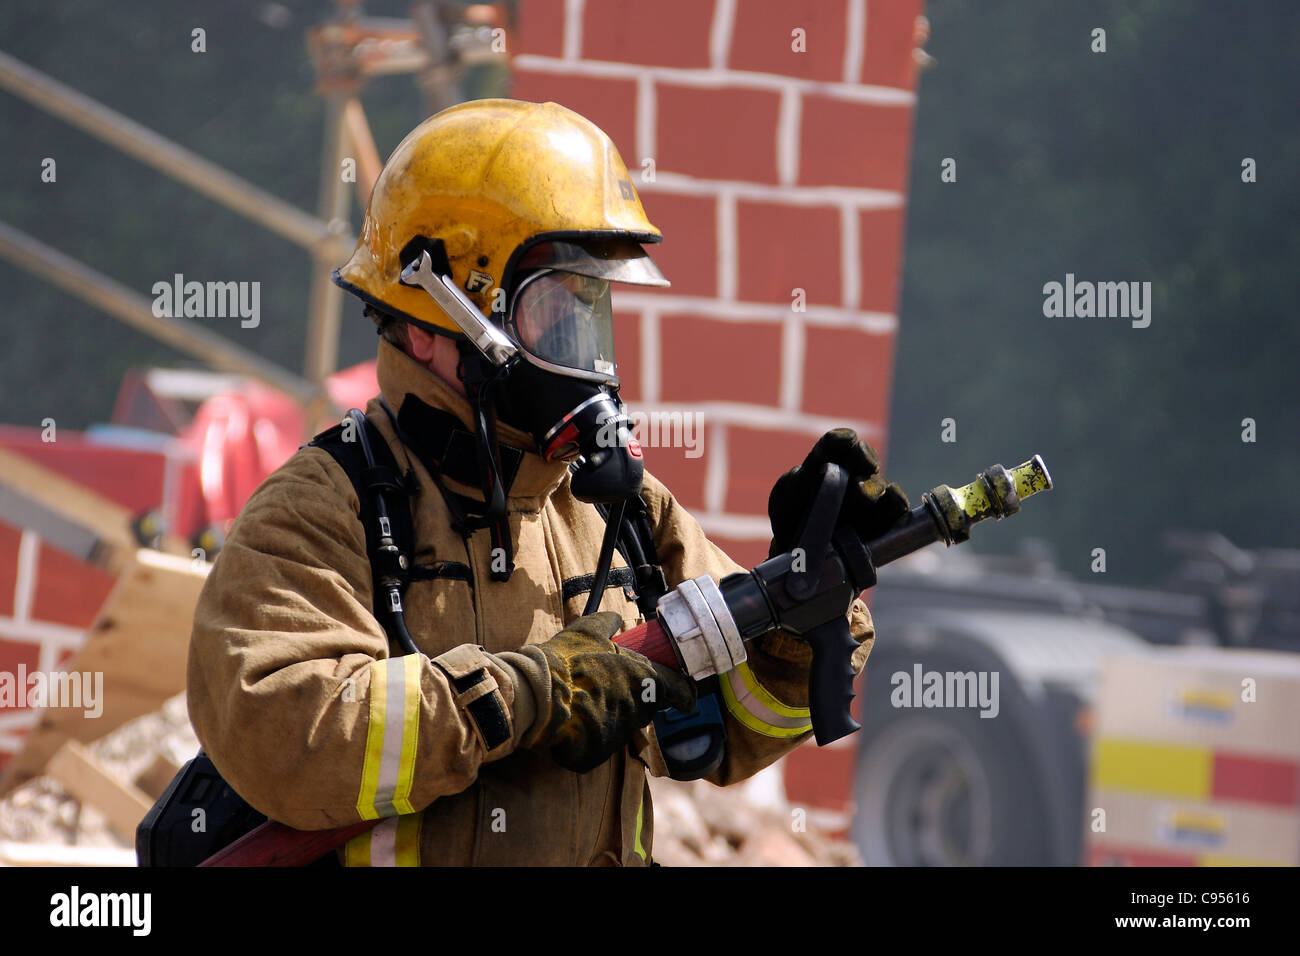 Firefighter uniform uk High Resolution Stock Photography and Images - Alamy